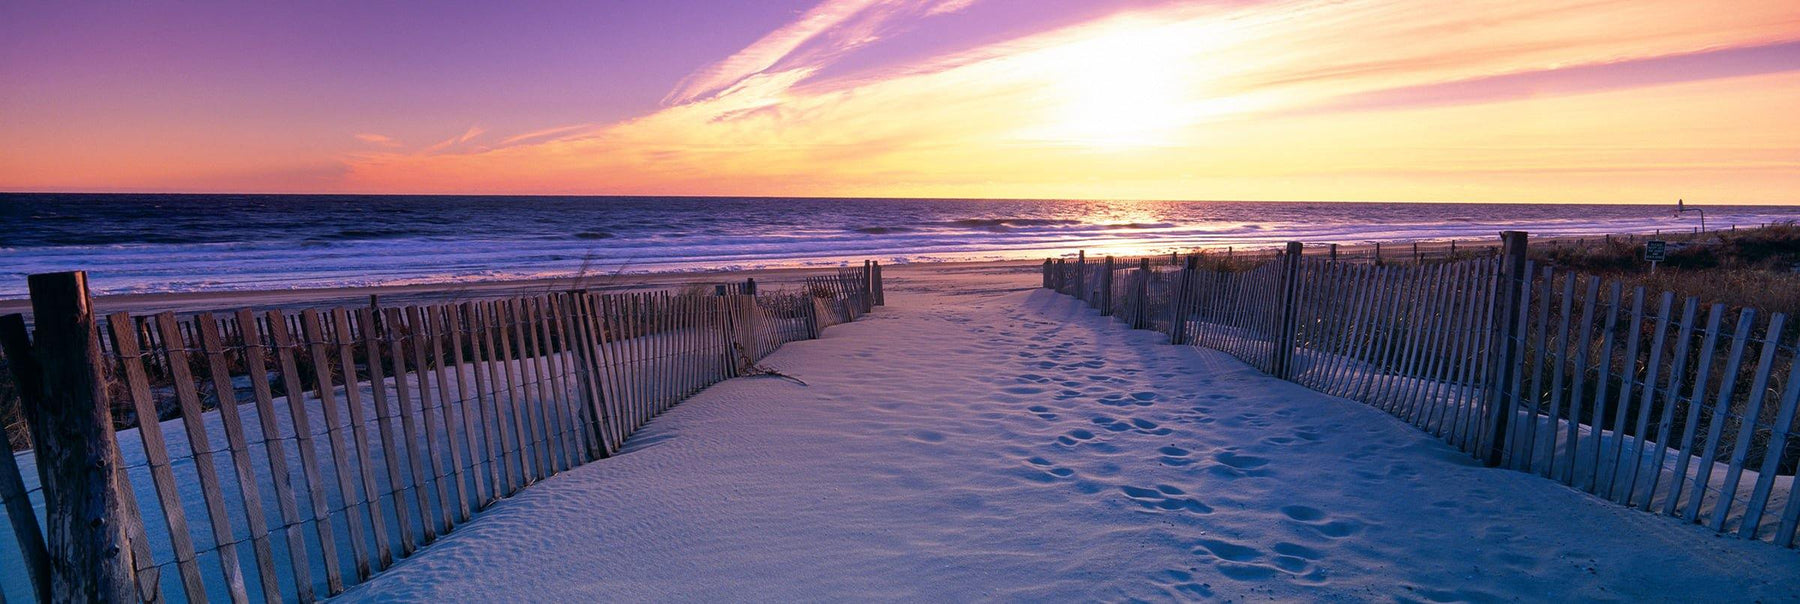 Sand pathway with picket fences leading to a beach in Newport Rhode Island during sunrise